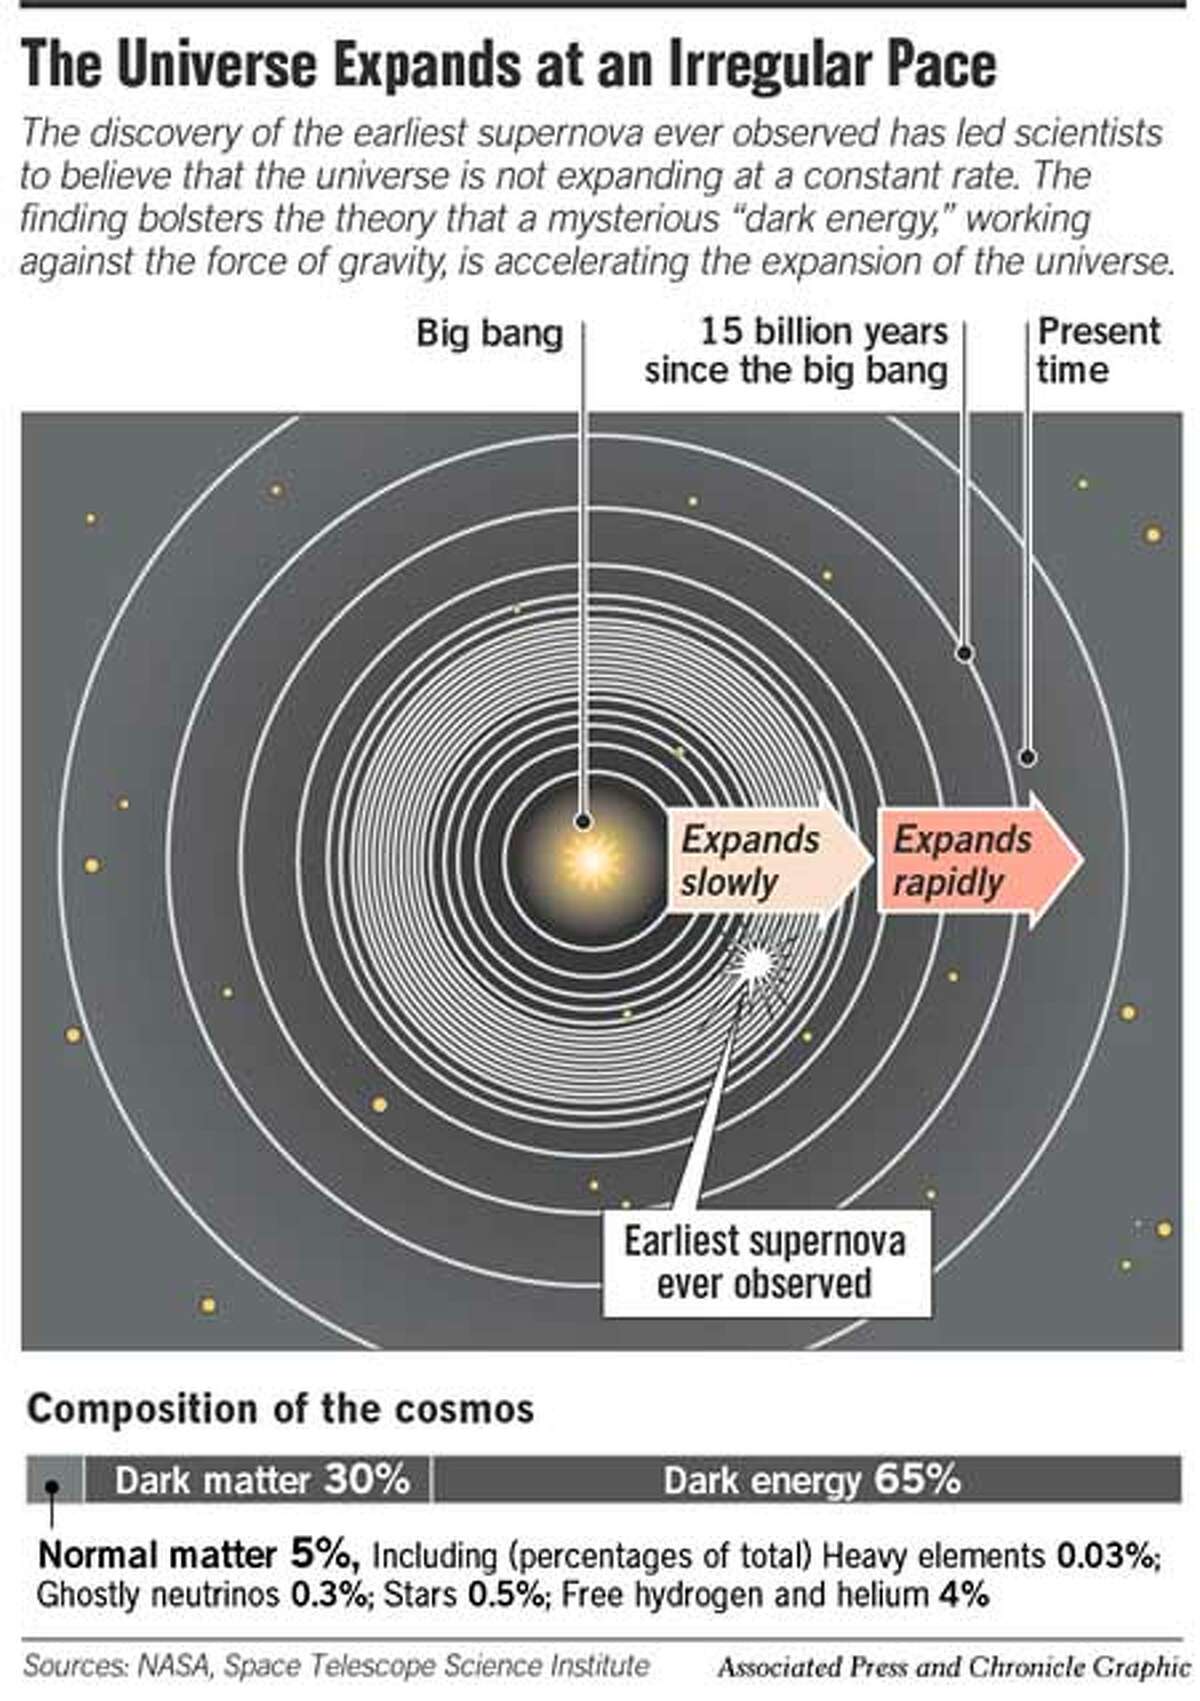 Universe Expands at an Irregular Pace. Associated Press and Chronicle Graphic